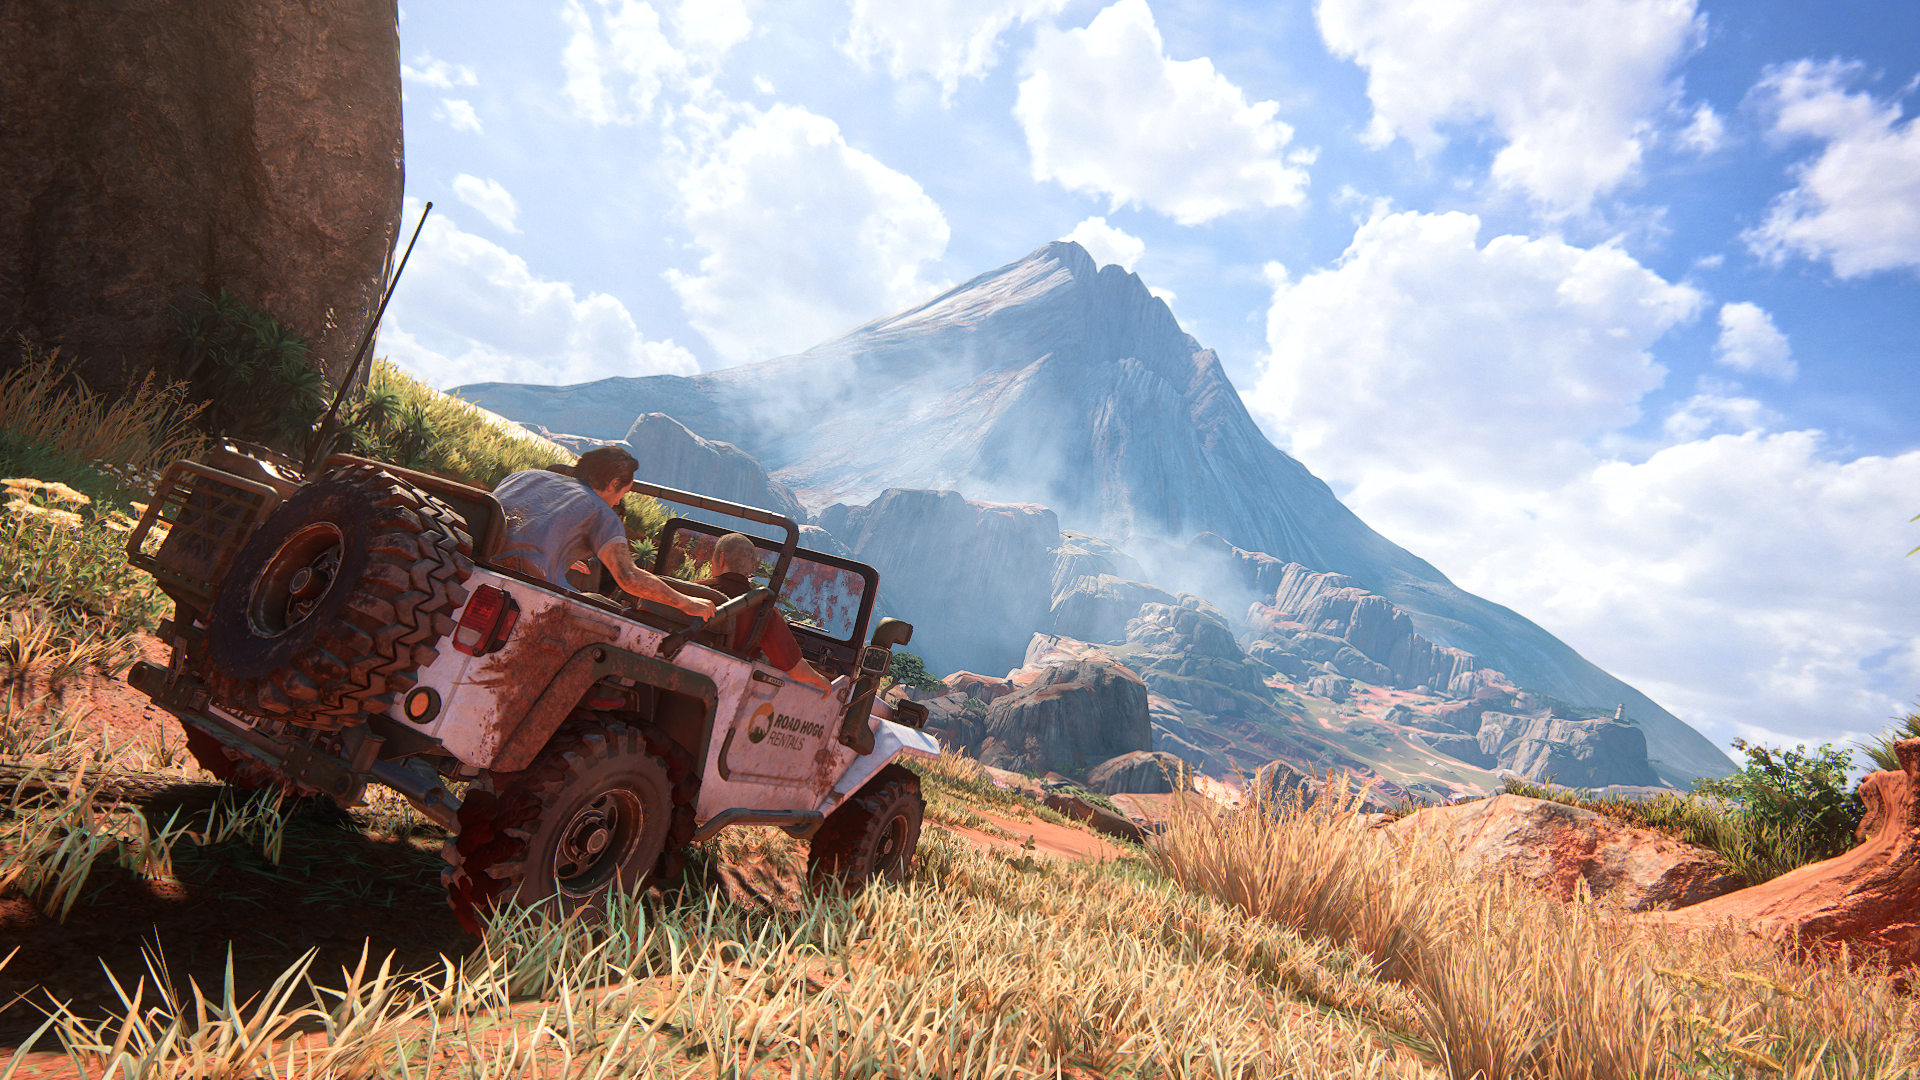 PlayStation 4 Uncharted 4 A Thiefs End Video Games CGi Mountains Vehicle 1920x1080